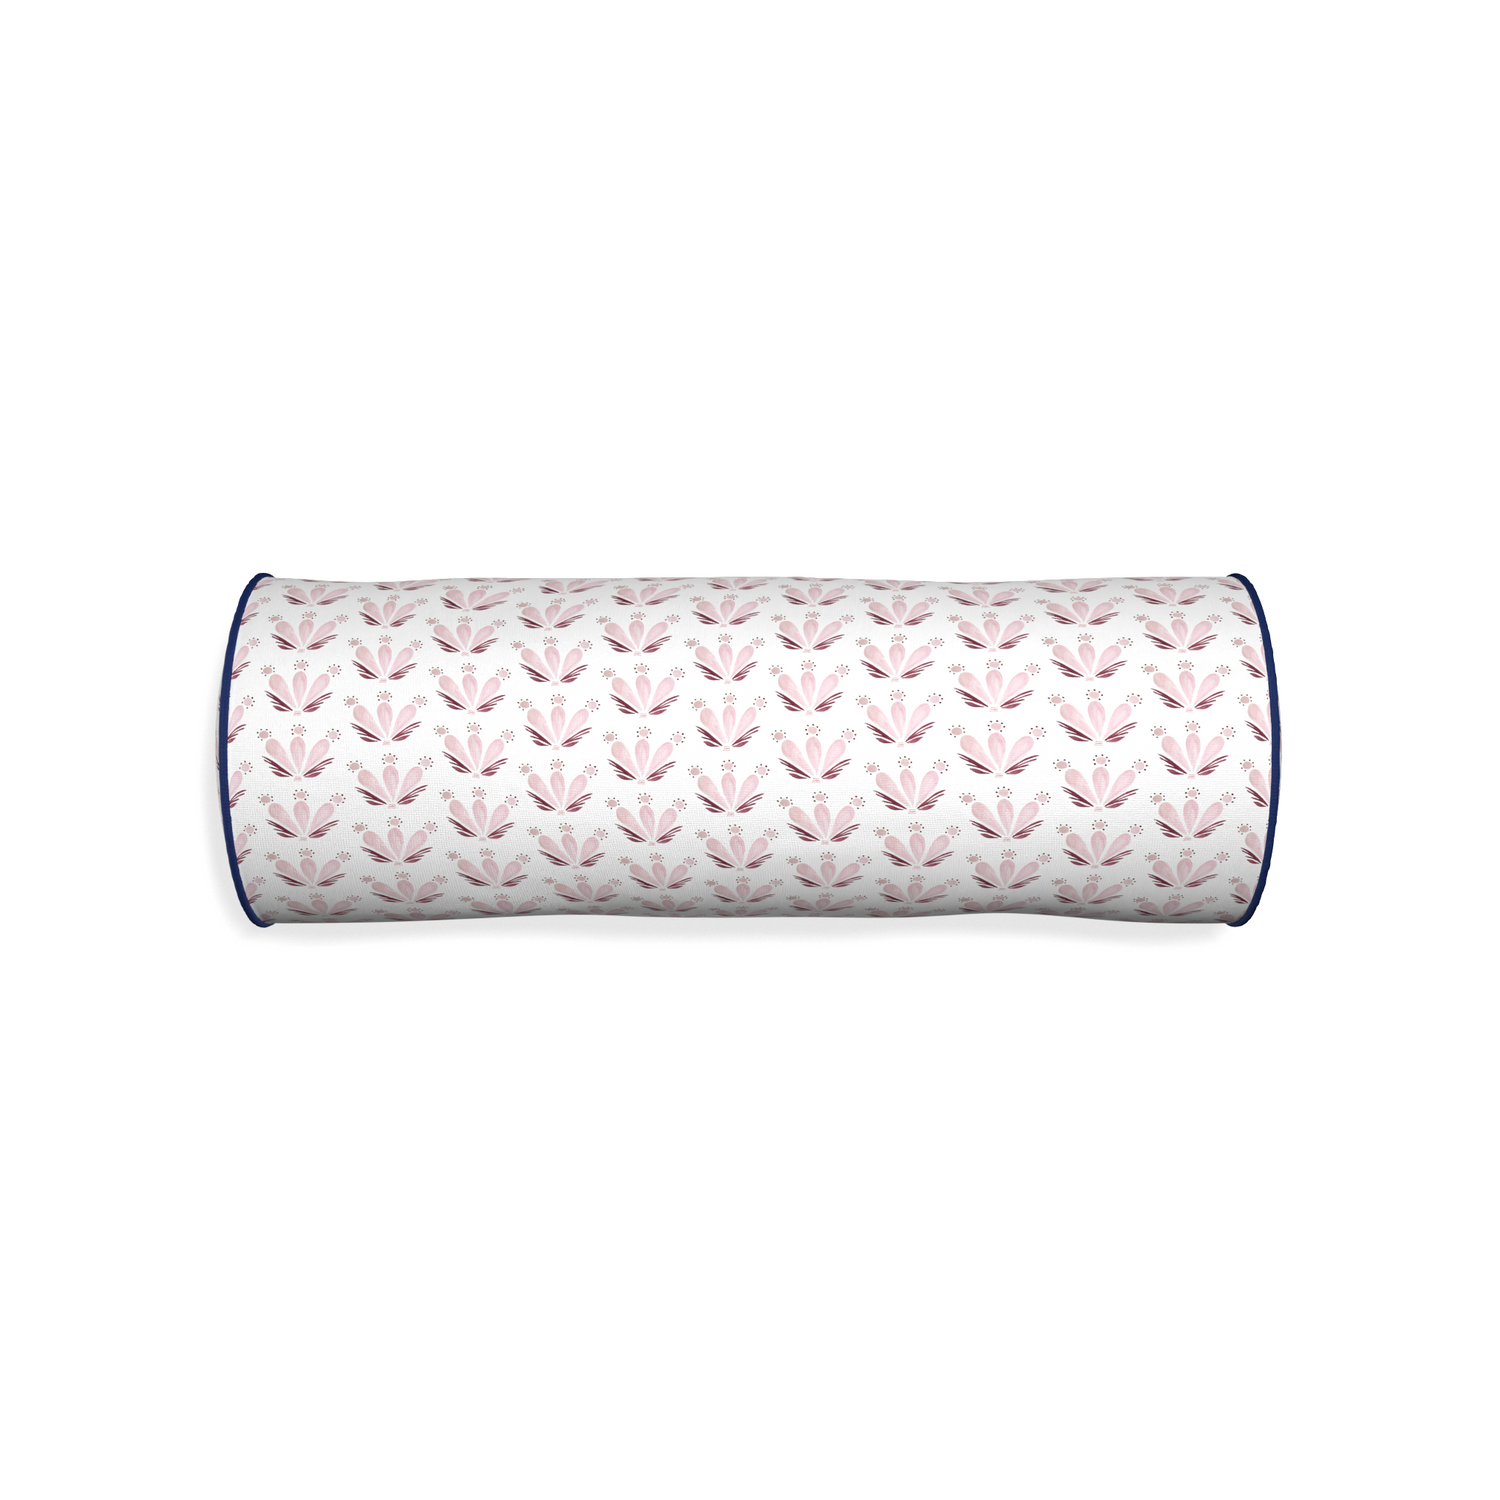 Bolster serena pink custom pink & burgundy drop repeat floralpillow with midnight piping on white background